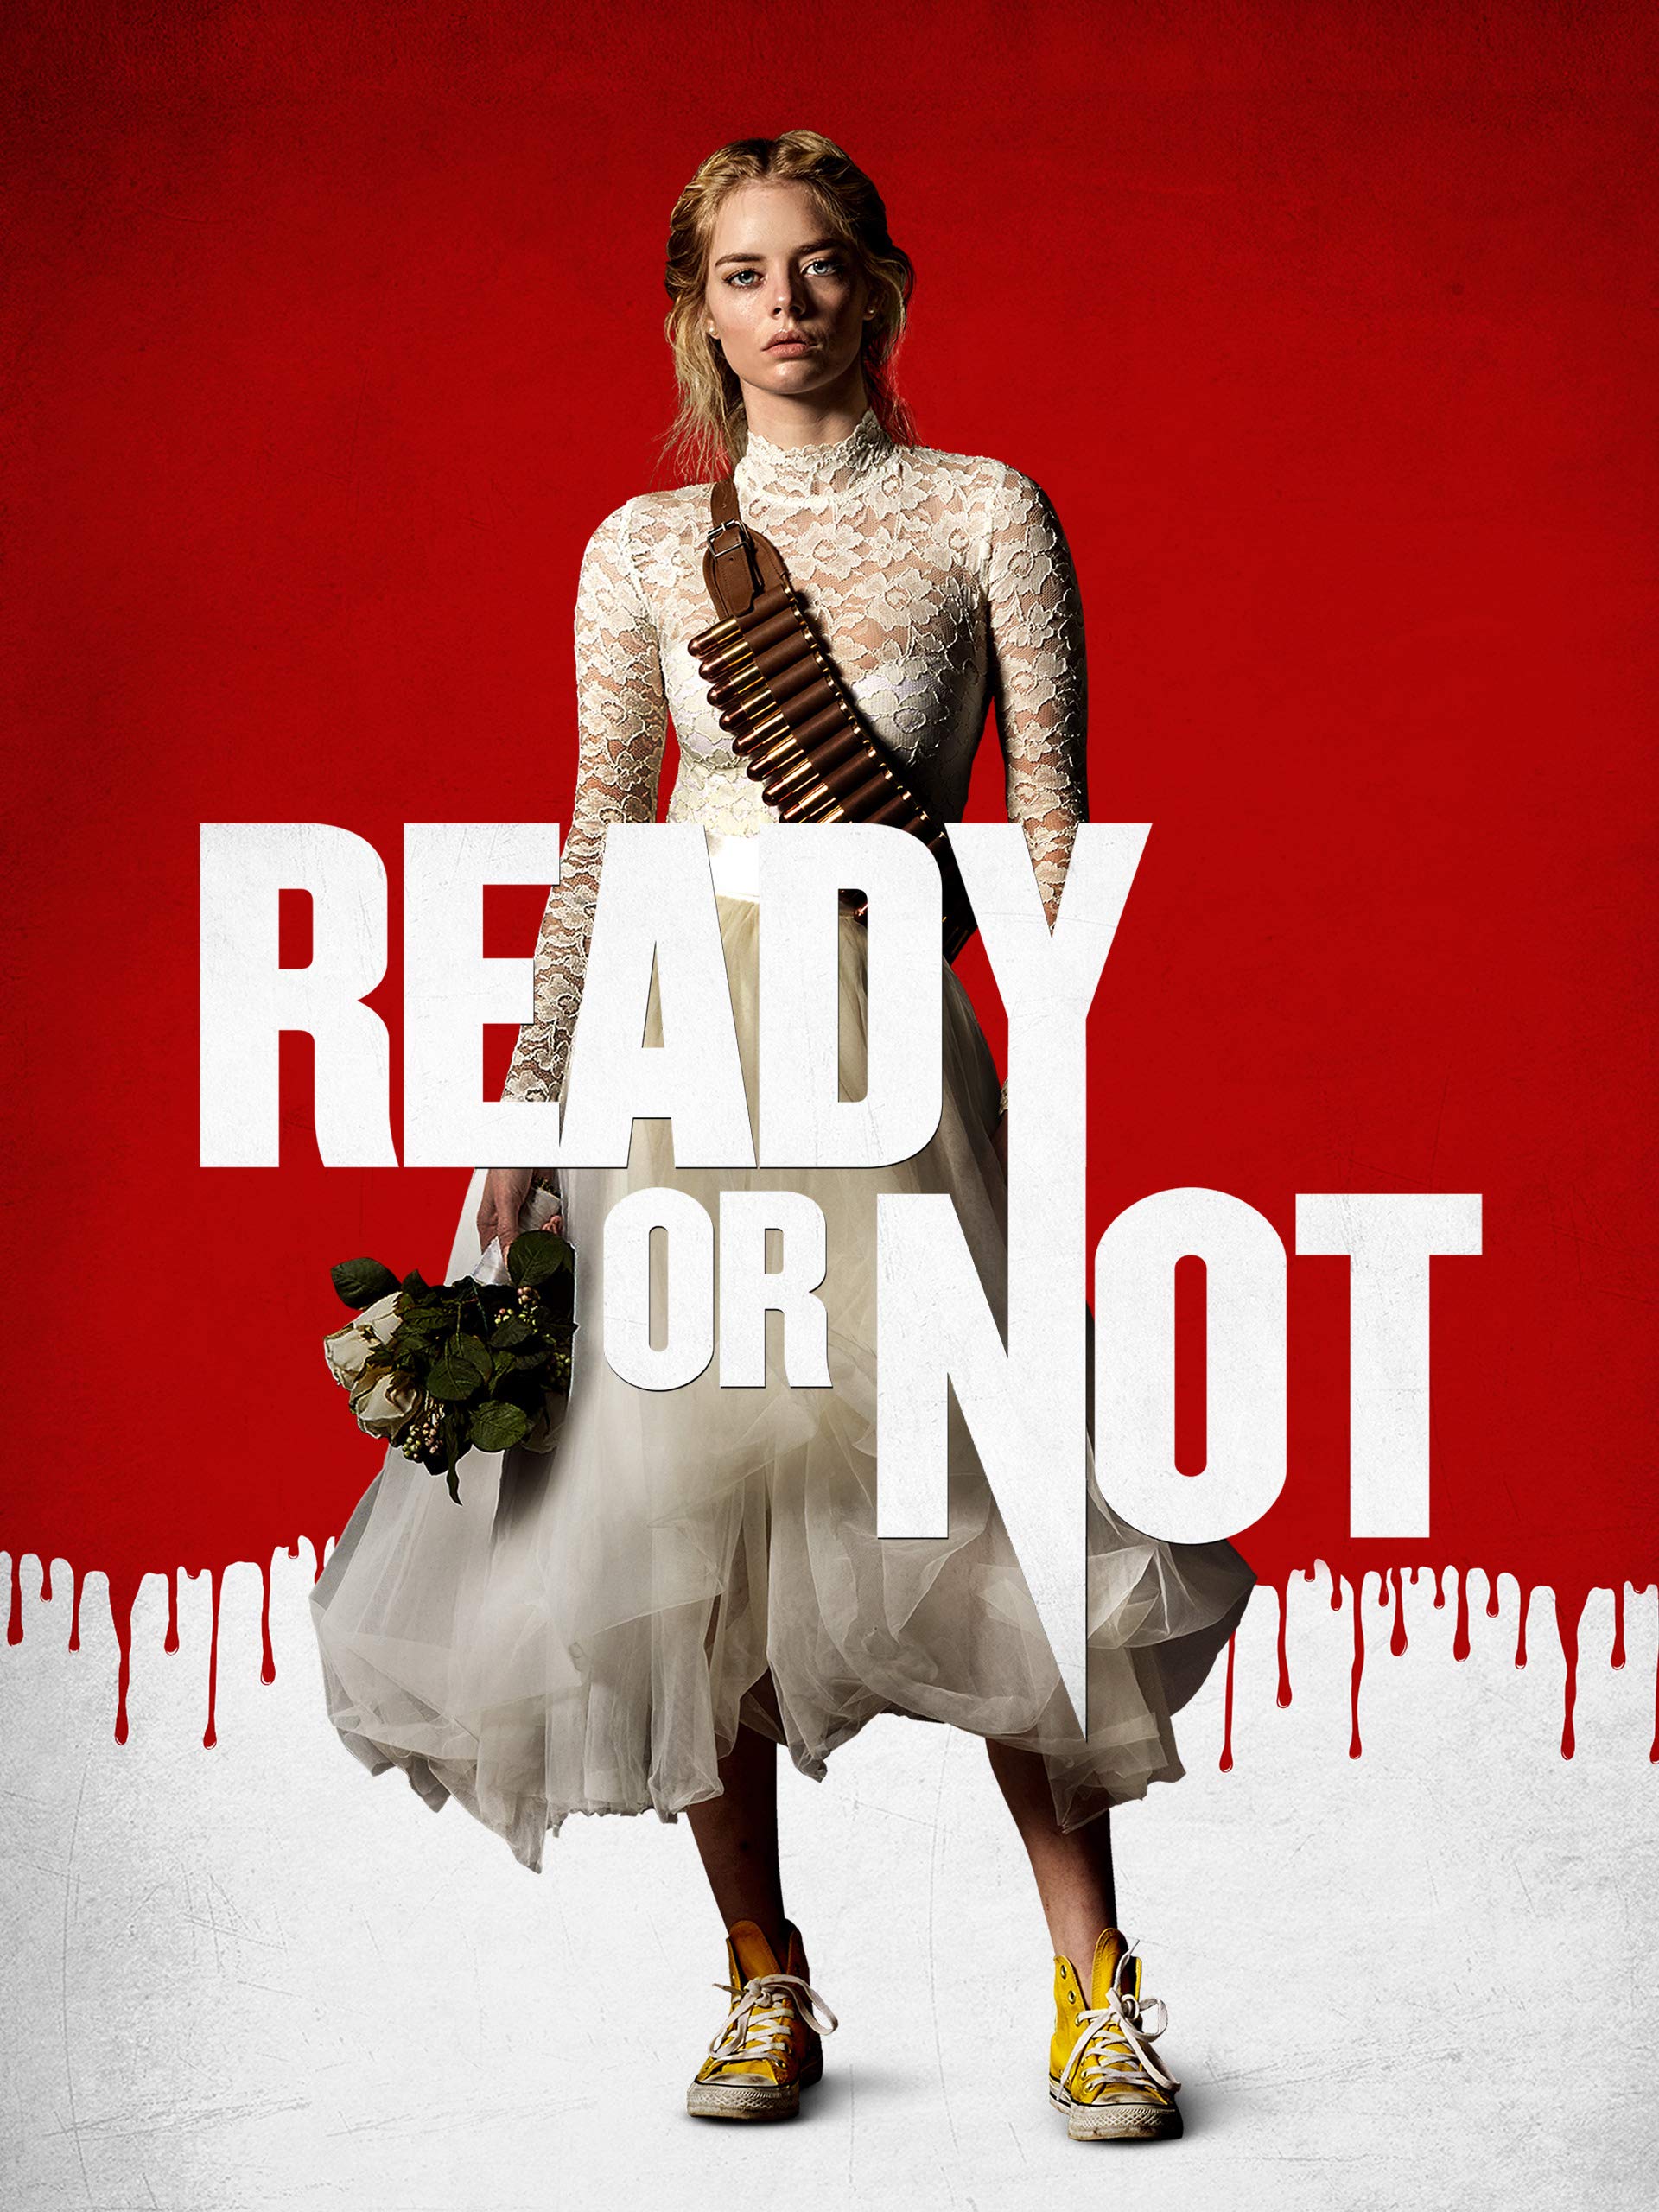 Ready Or Not Movie Wallpapers Wallpaper Cave